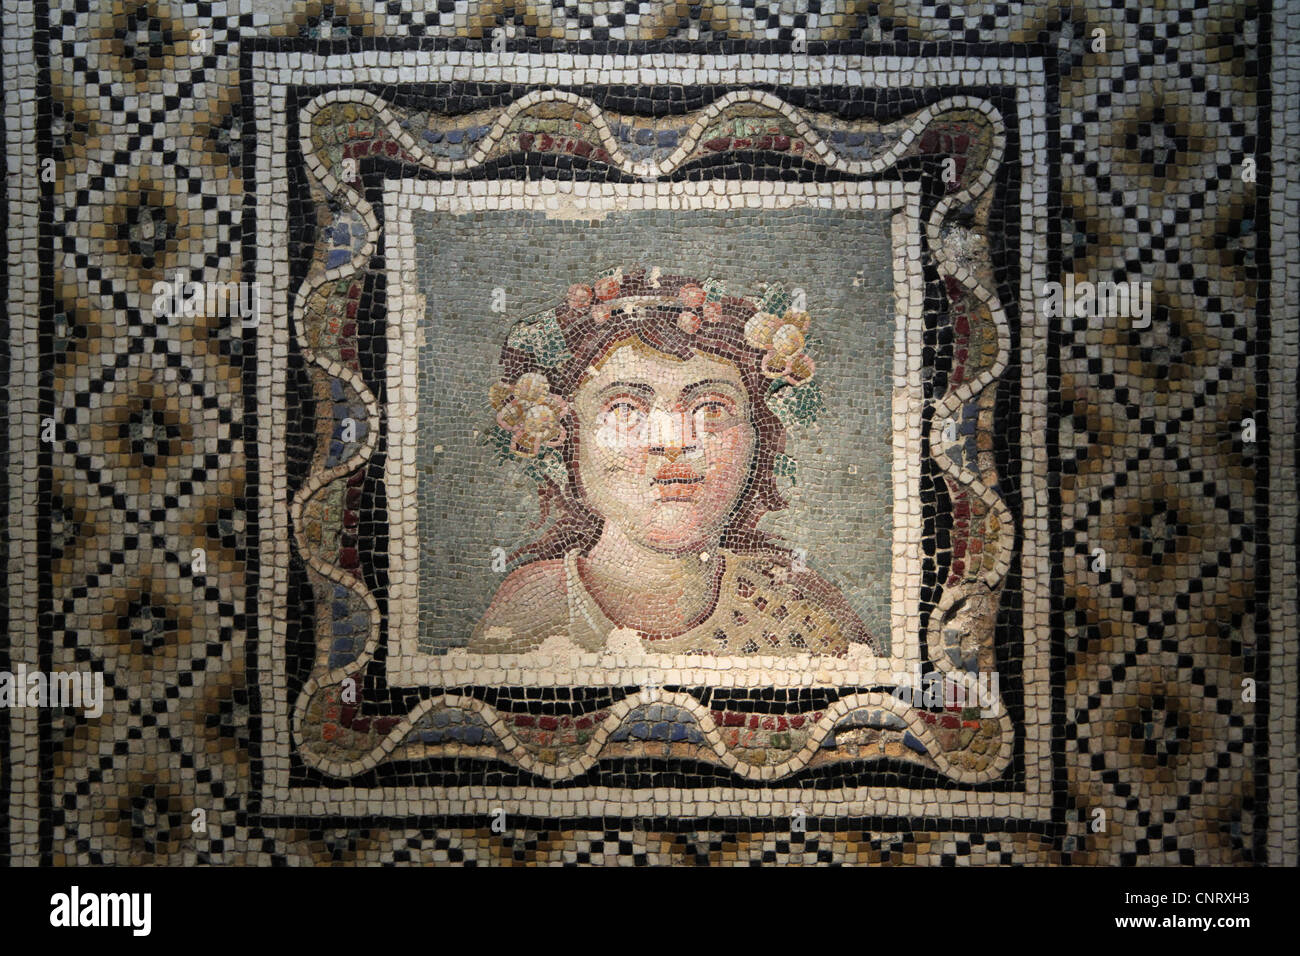 Dionysus. Pavement Roman mosaic from 3rd century AD in Museo Nazionale Romano in Rome, Italy. Stock Photo